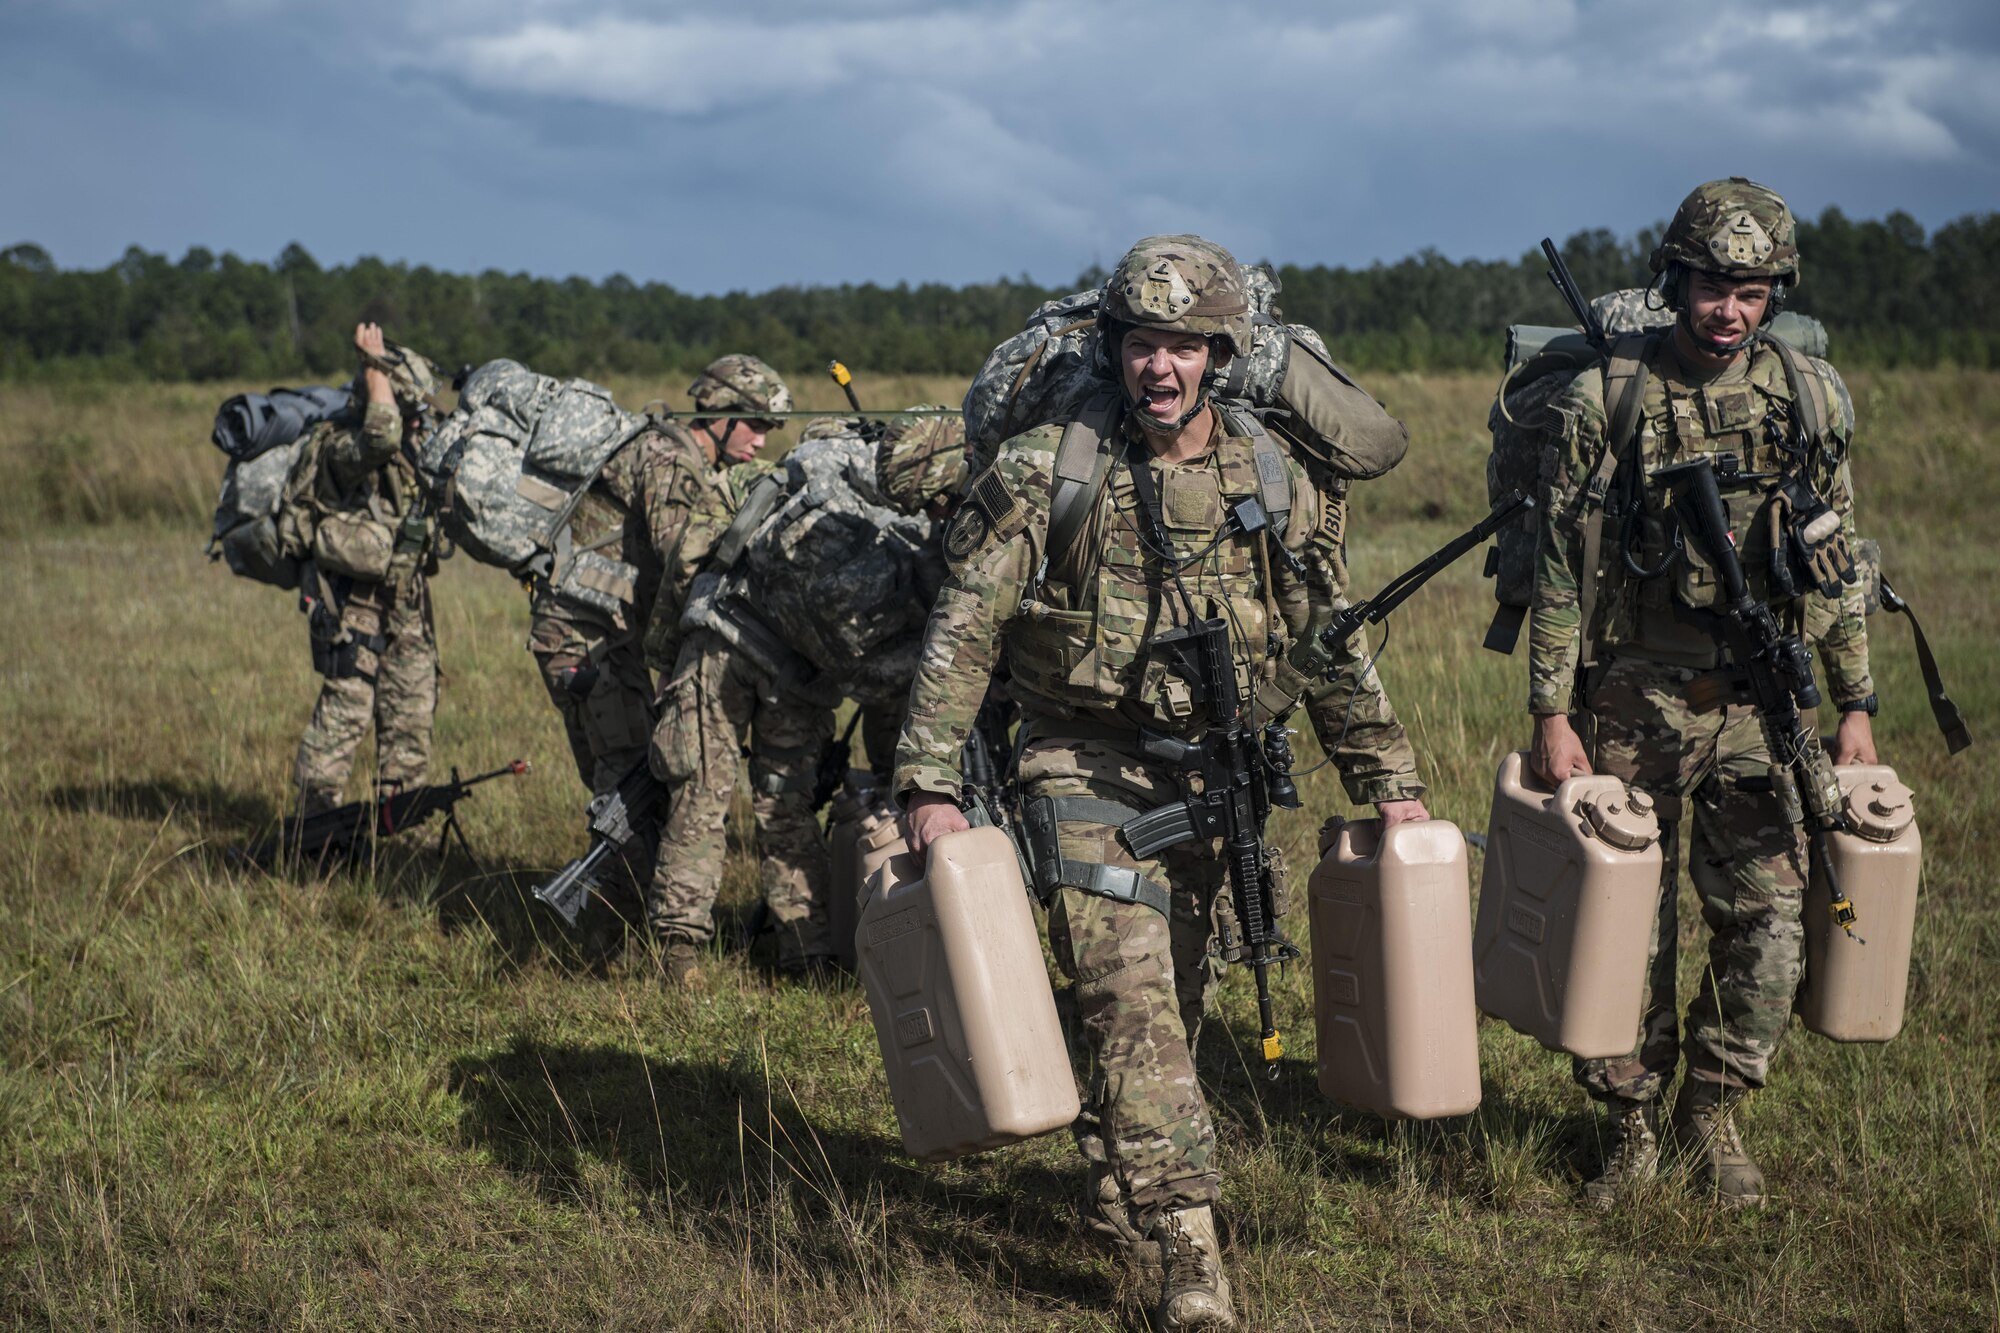 Airmen from the 823d Base Defense Squadron walk to their campsite during a mission readiness exercise, Oct. 23, 2017, at Moody Air Force Base, Ga. The 820th Base Defense Group tested the 823d BDS’s ability to operate in an austere environment with challenging scenarios that tested their capabilities and effectiveness. (U.S. Air Force Senior Airman Janiqua P. Robinson)